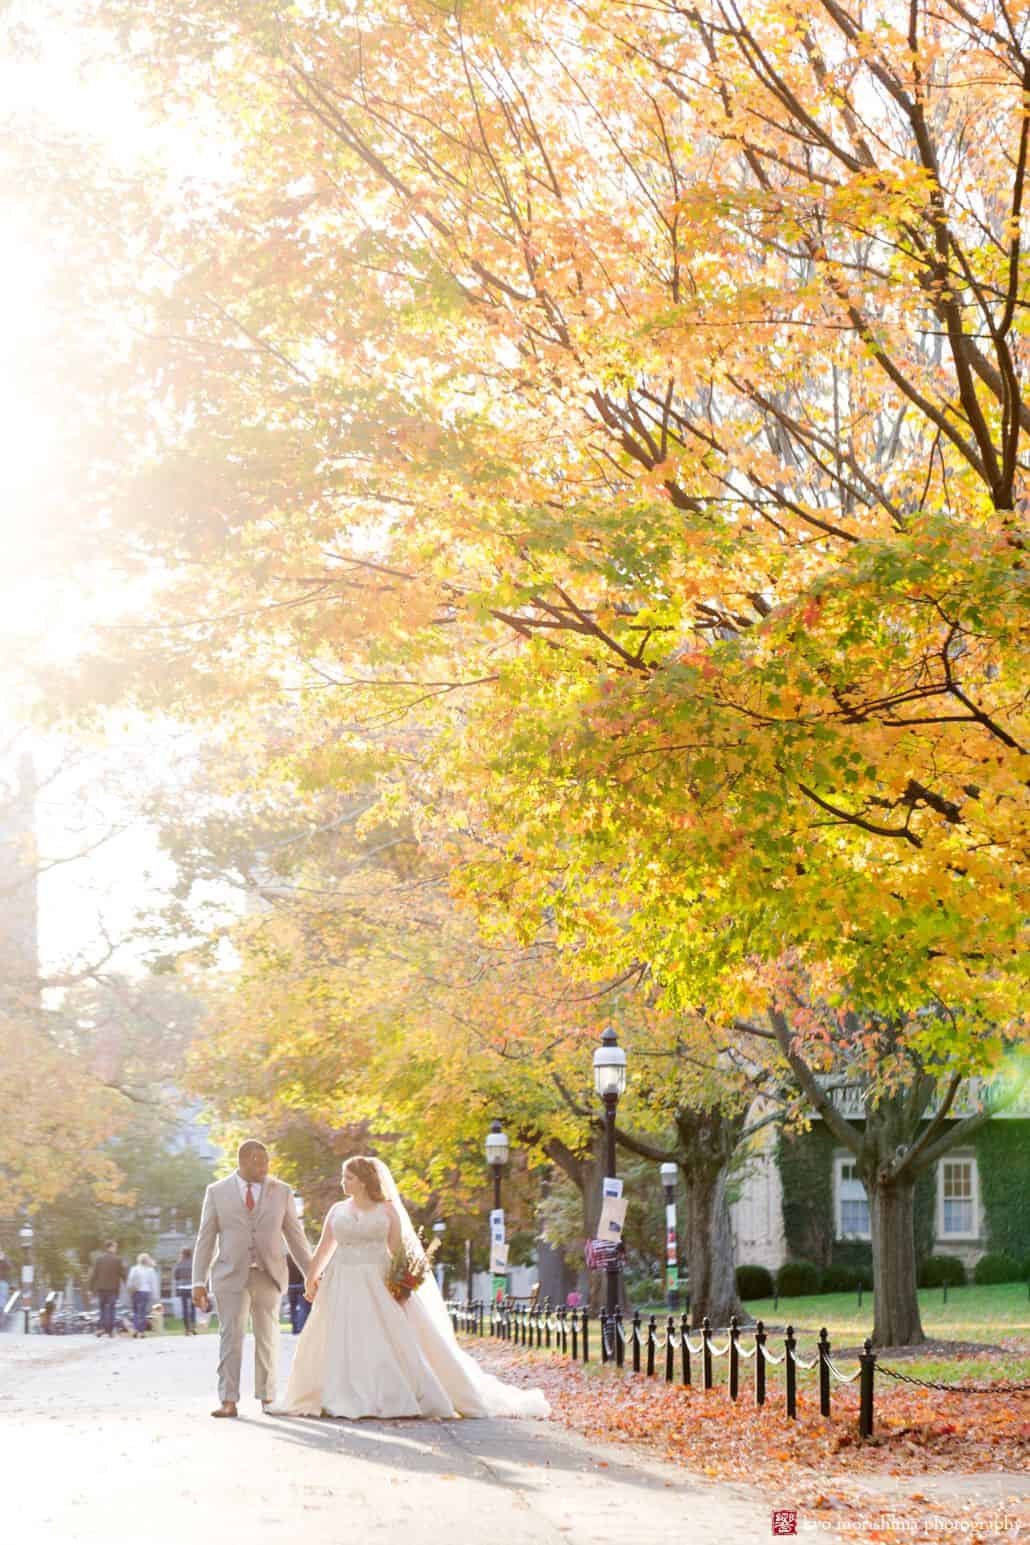 Wedding portrait with fall leaves; bride and groom enjoy a walk down the street on Princeton University campus